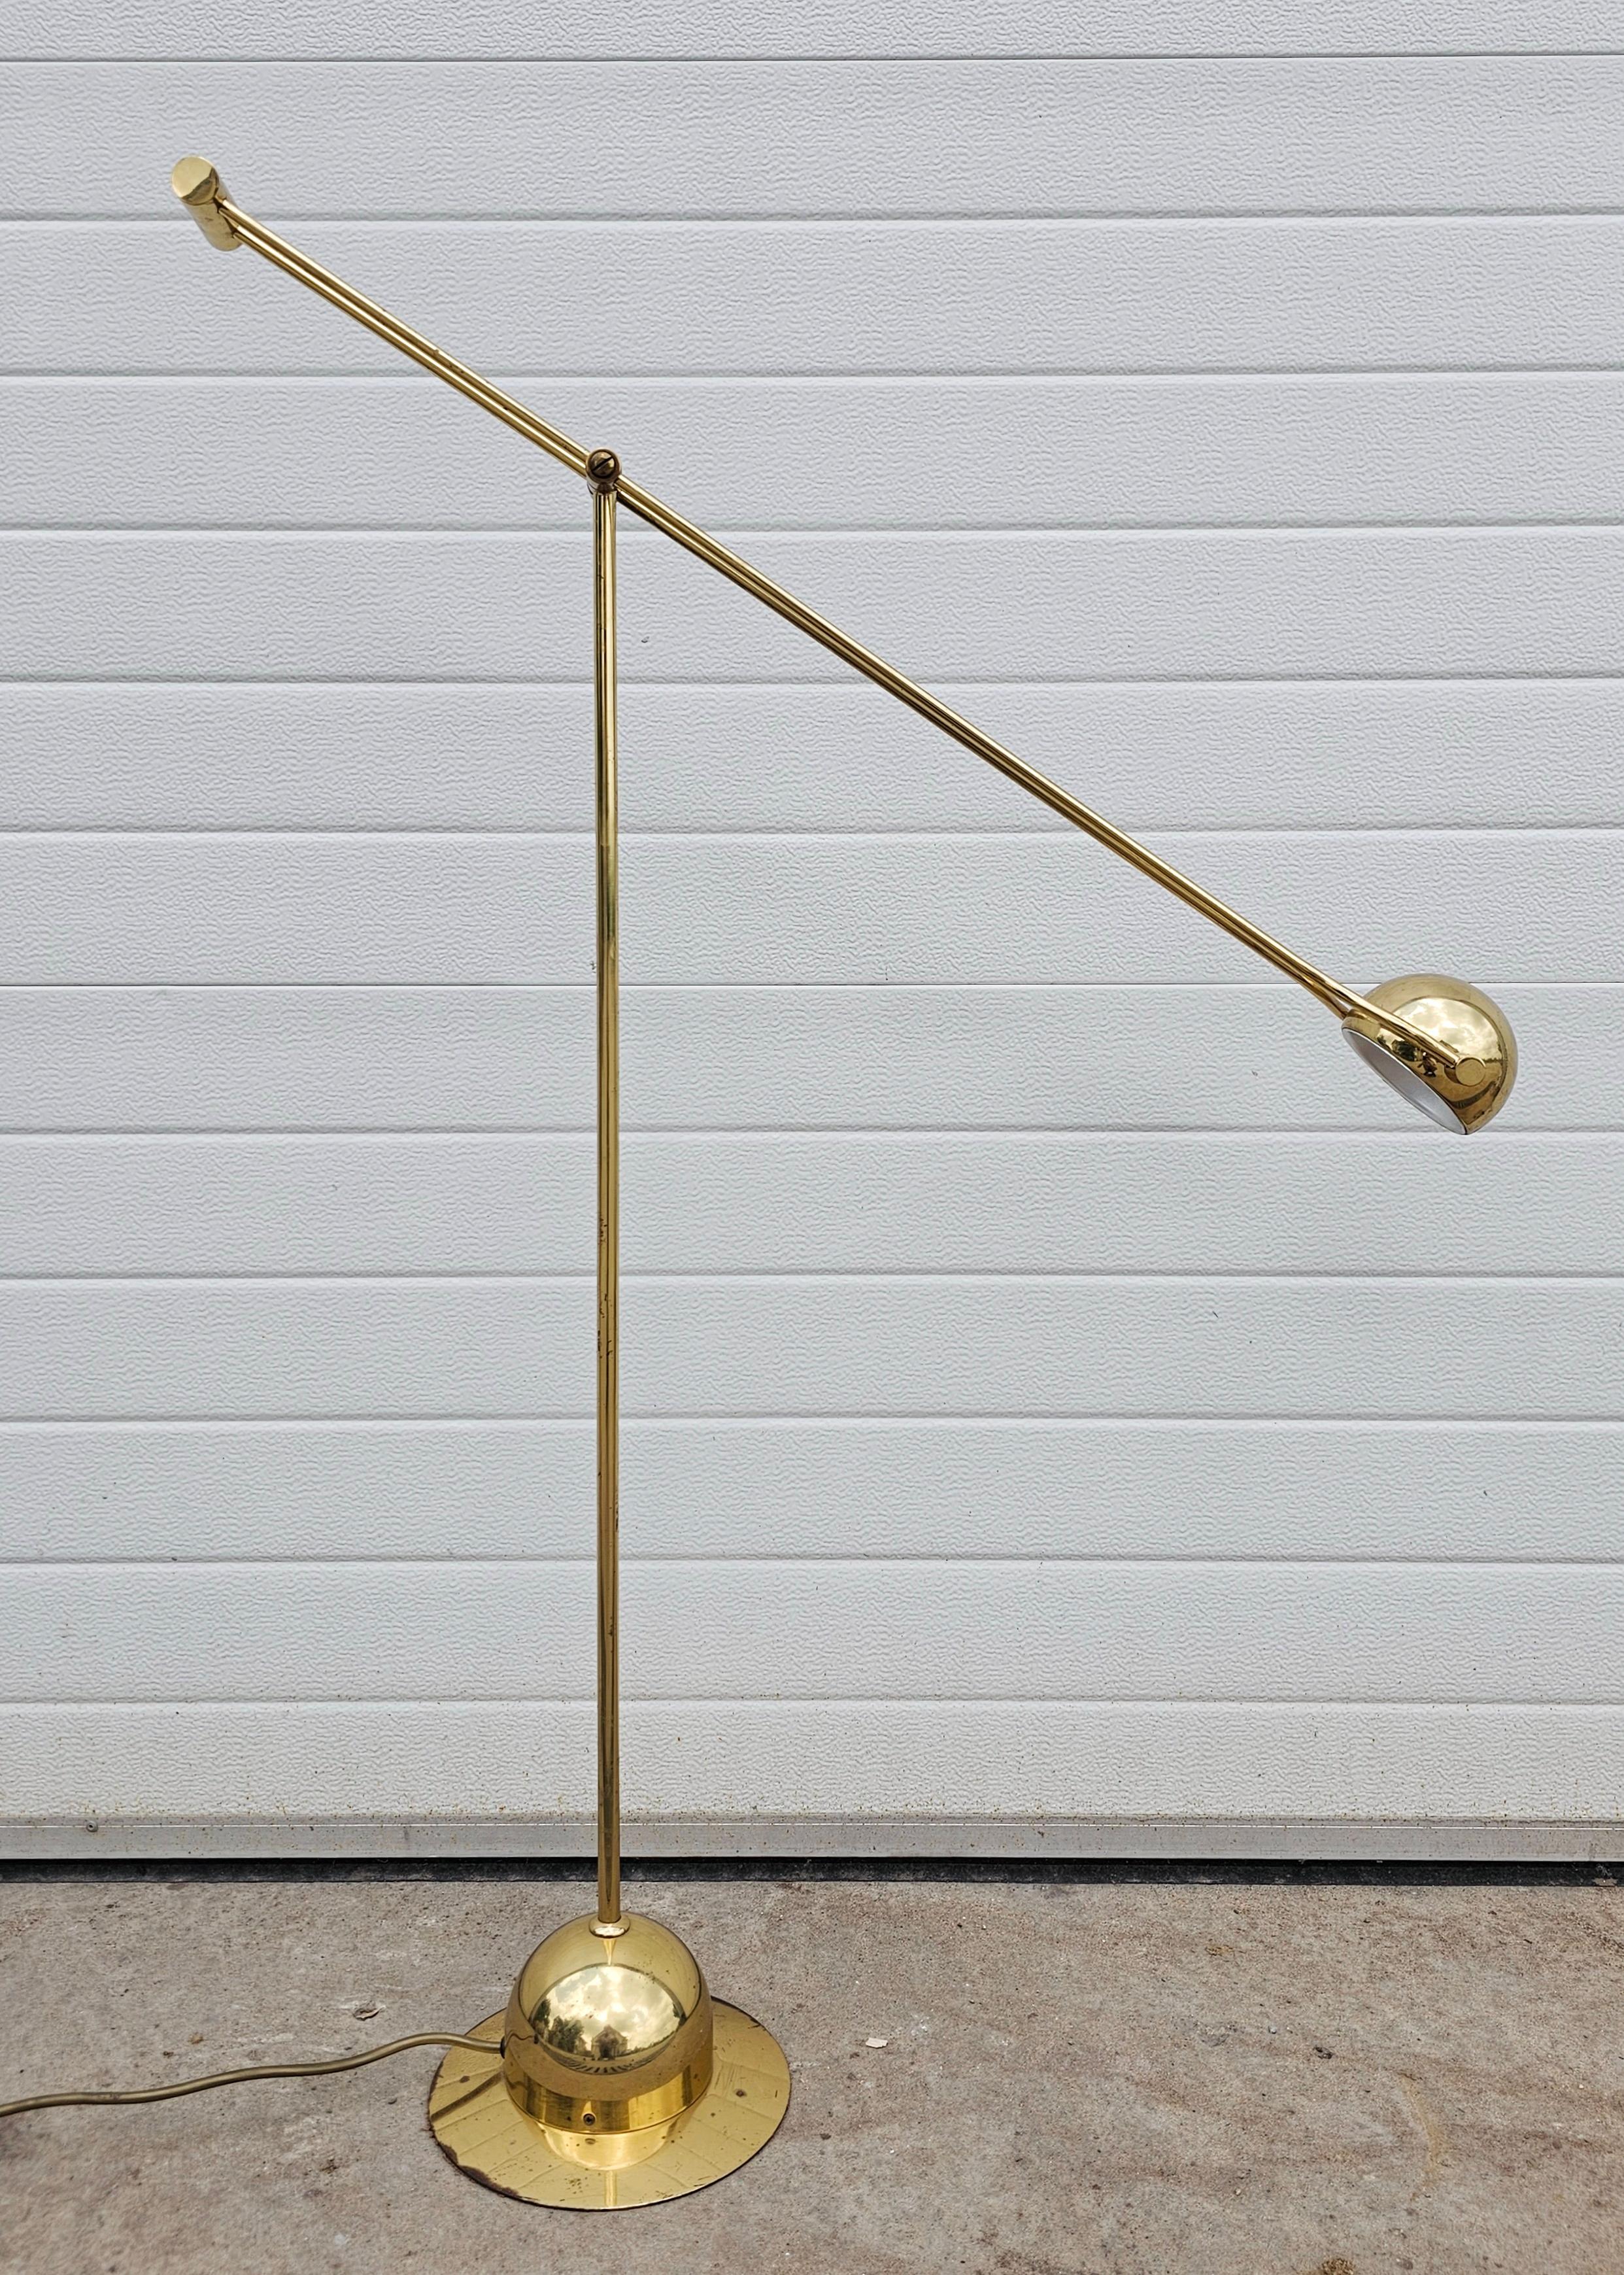 In this listing you will find a rare Mid Century Modern Floor Lamp. It's completely done in brass and features very elegant lines with the counterweight, with an adjustable arm that allows you to adjust the height of the light. The head of the lump